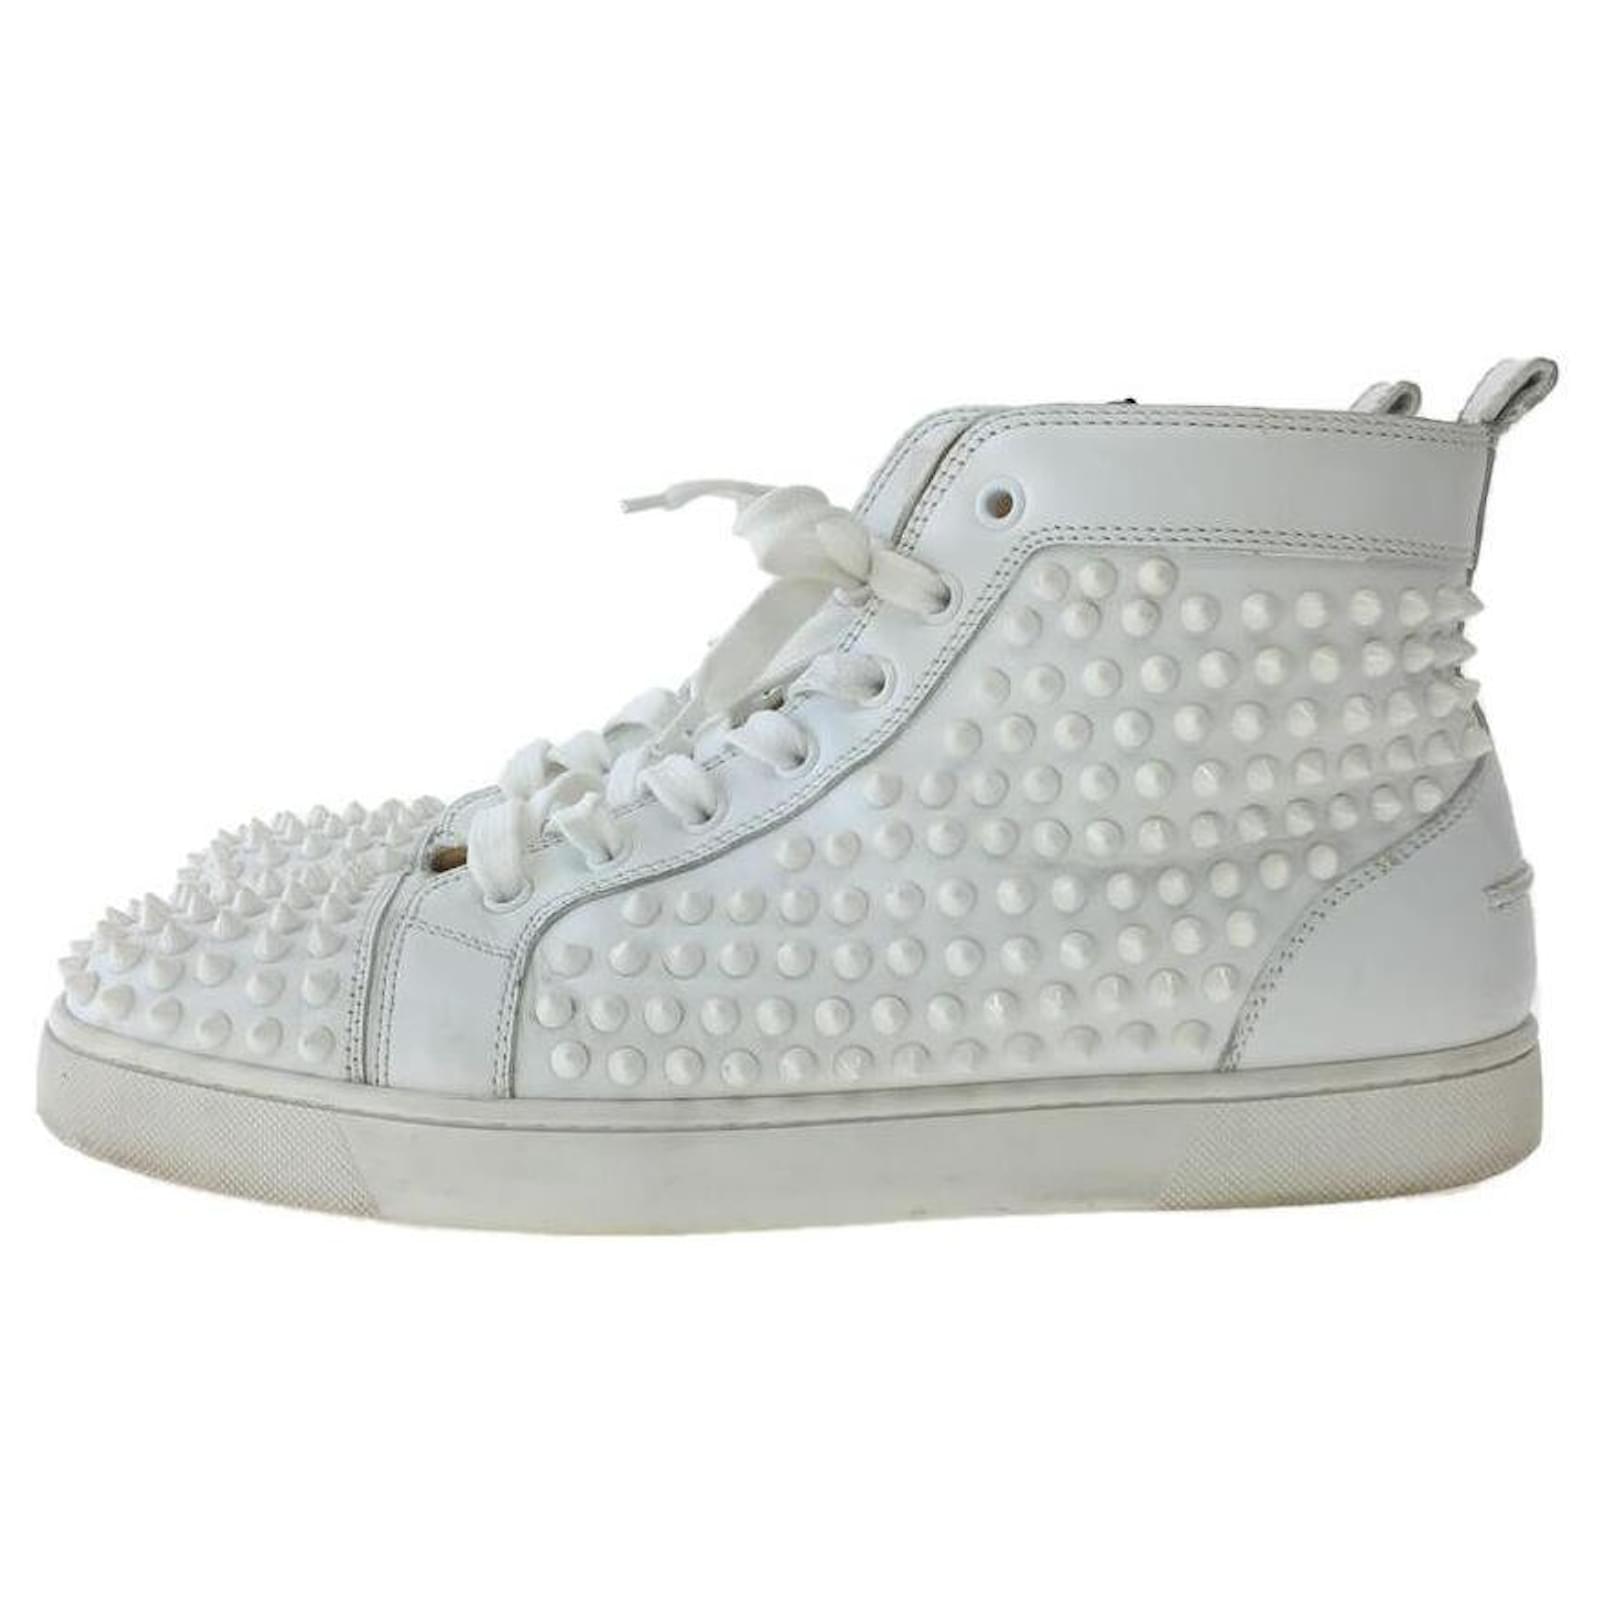 Christian Louboutin Louis Spikes High-Top Sneakers